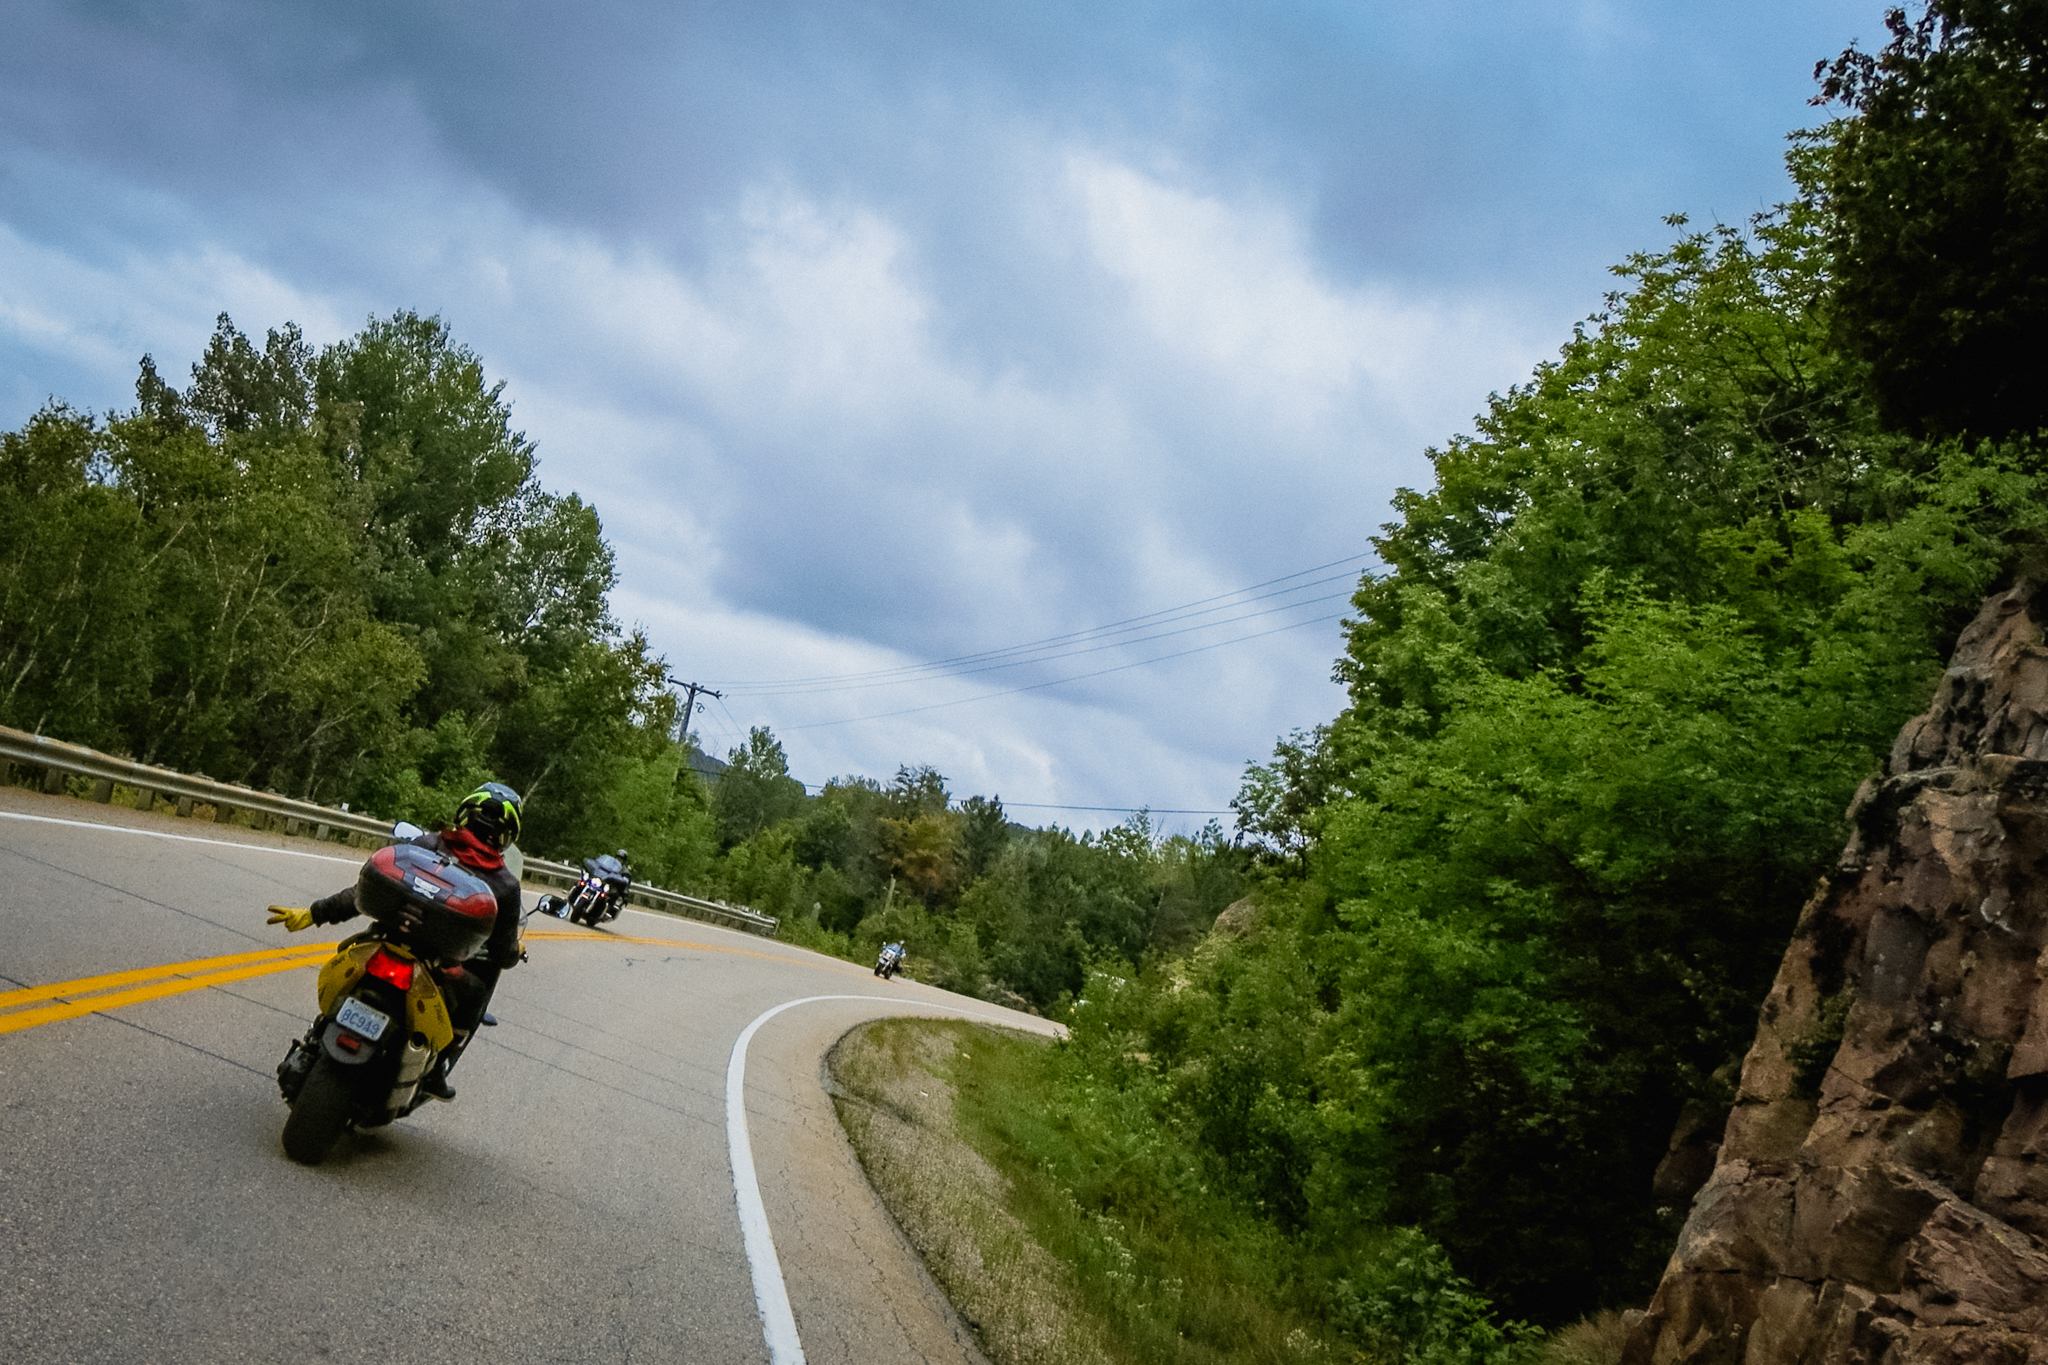 A motorcyclist from behind, giving a two-fingered wave to a passing biker. They are rounding a corner on a quiet highway surrounded by lush green forest and under blue-grey storm clouds.